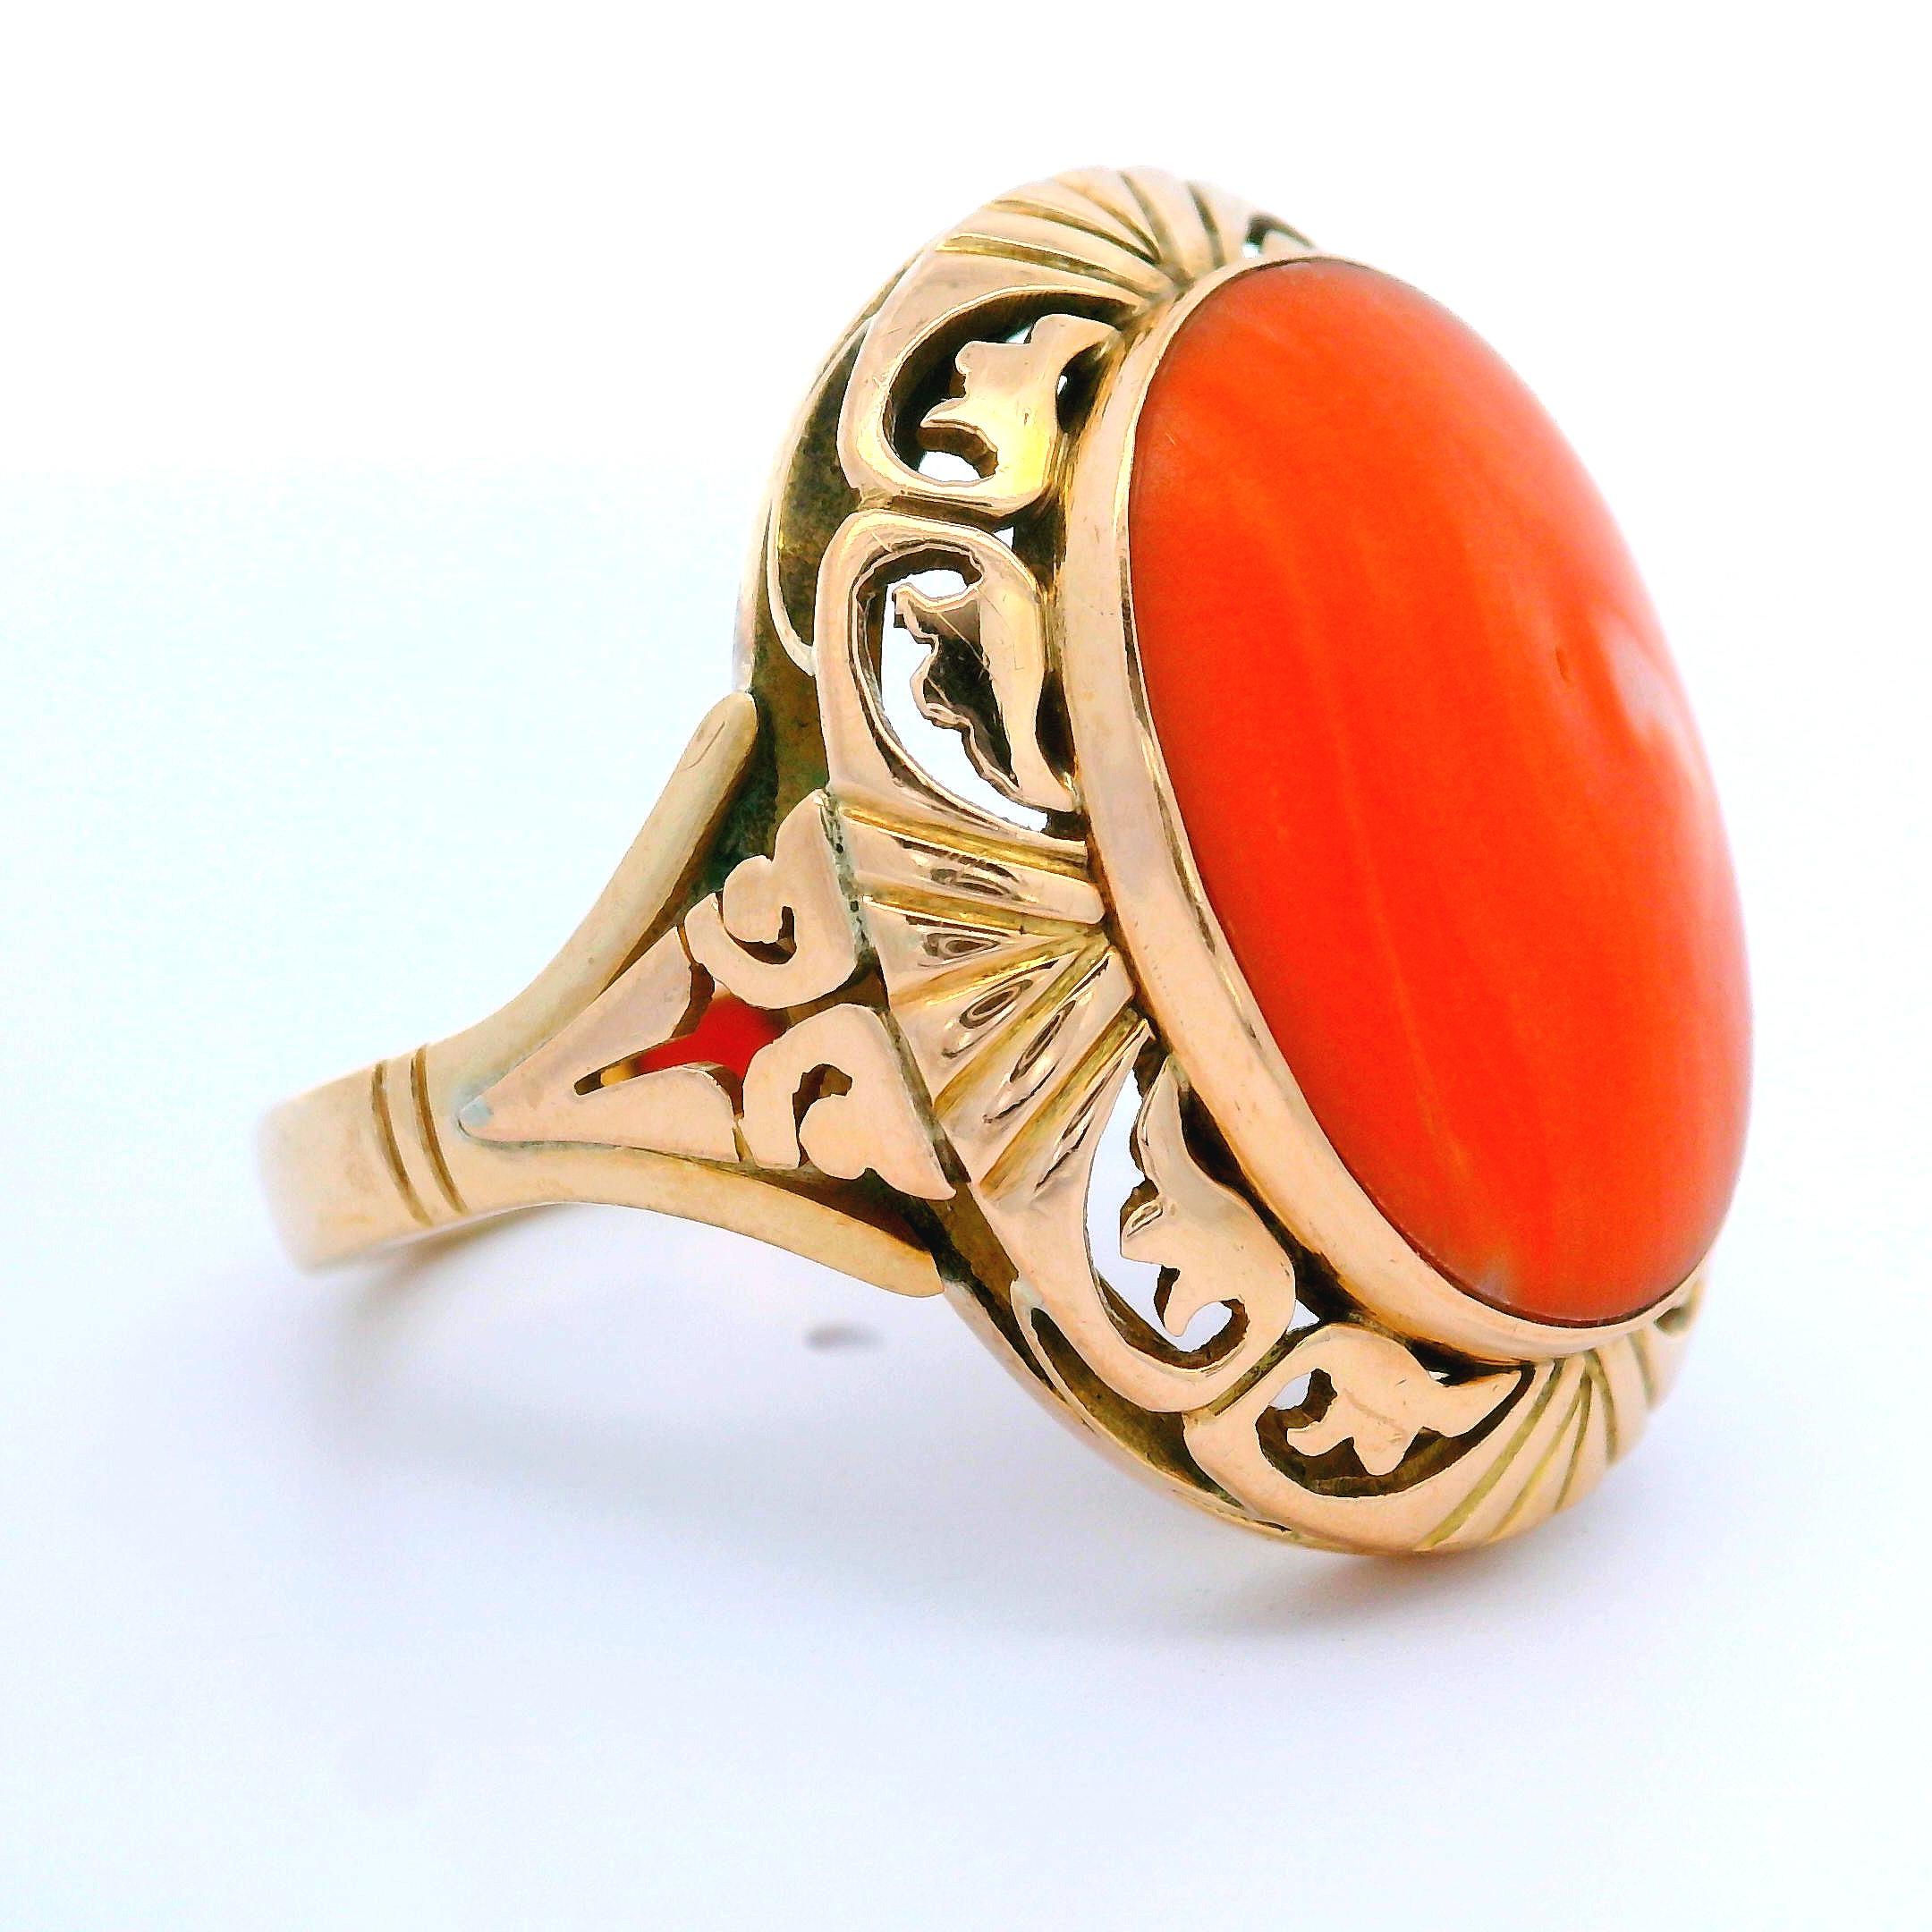 –Stone(s)–
(1) Natural Genuine Coral - Oval Cabochon - Bezel Set - Orangy-Pink Banded Color  - 18.3x13.3mm (approx.)
Material: Solid 14k Yellow Gold
Weight: 11.53 Grams
Ring Size: 10 (fitted on finger, please contact us prior to purchase with sizing